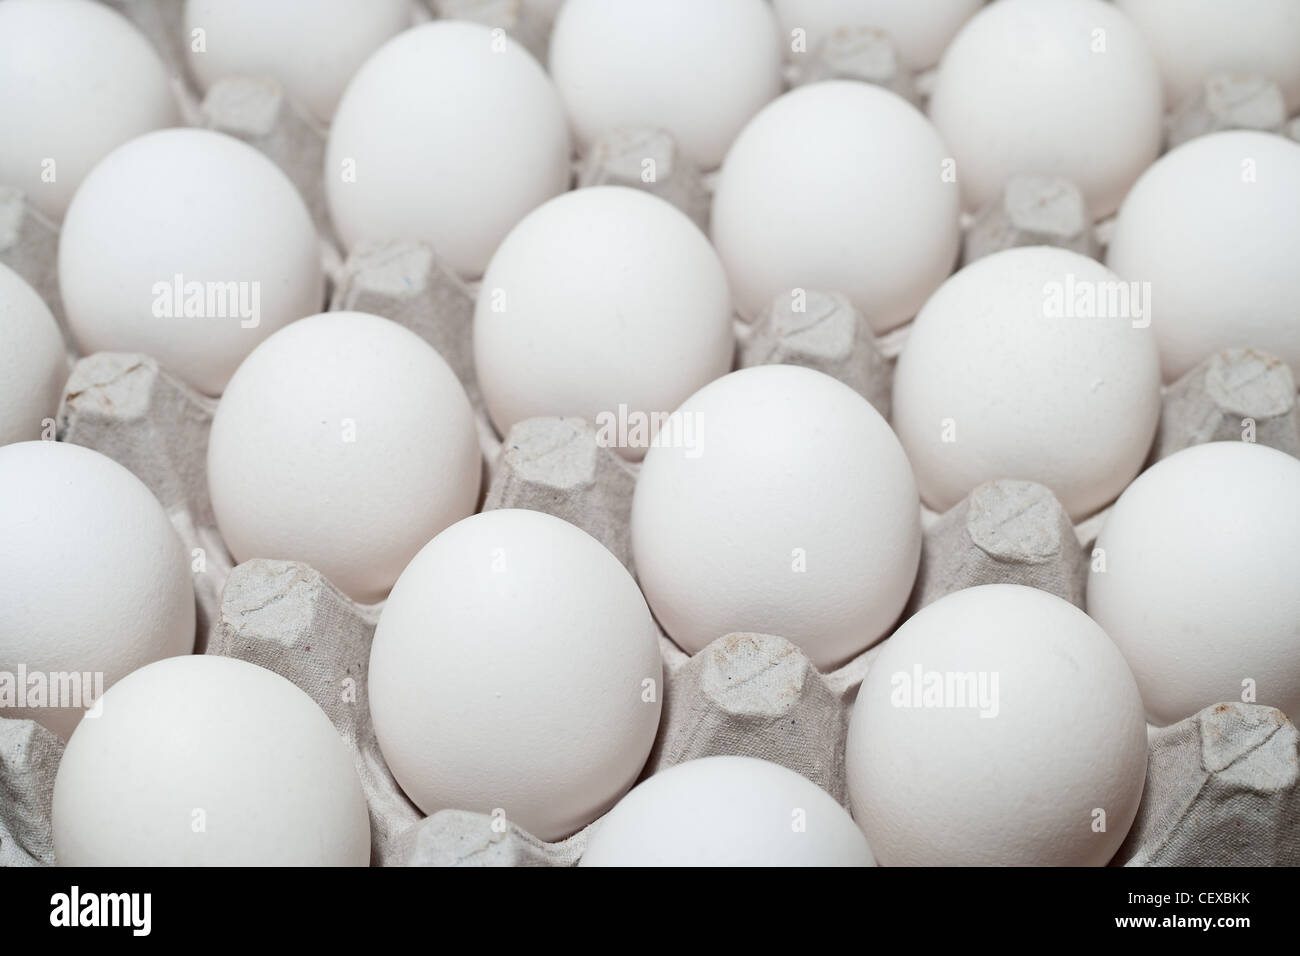 Eggs in a carrier Stock Photo